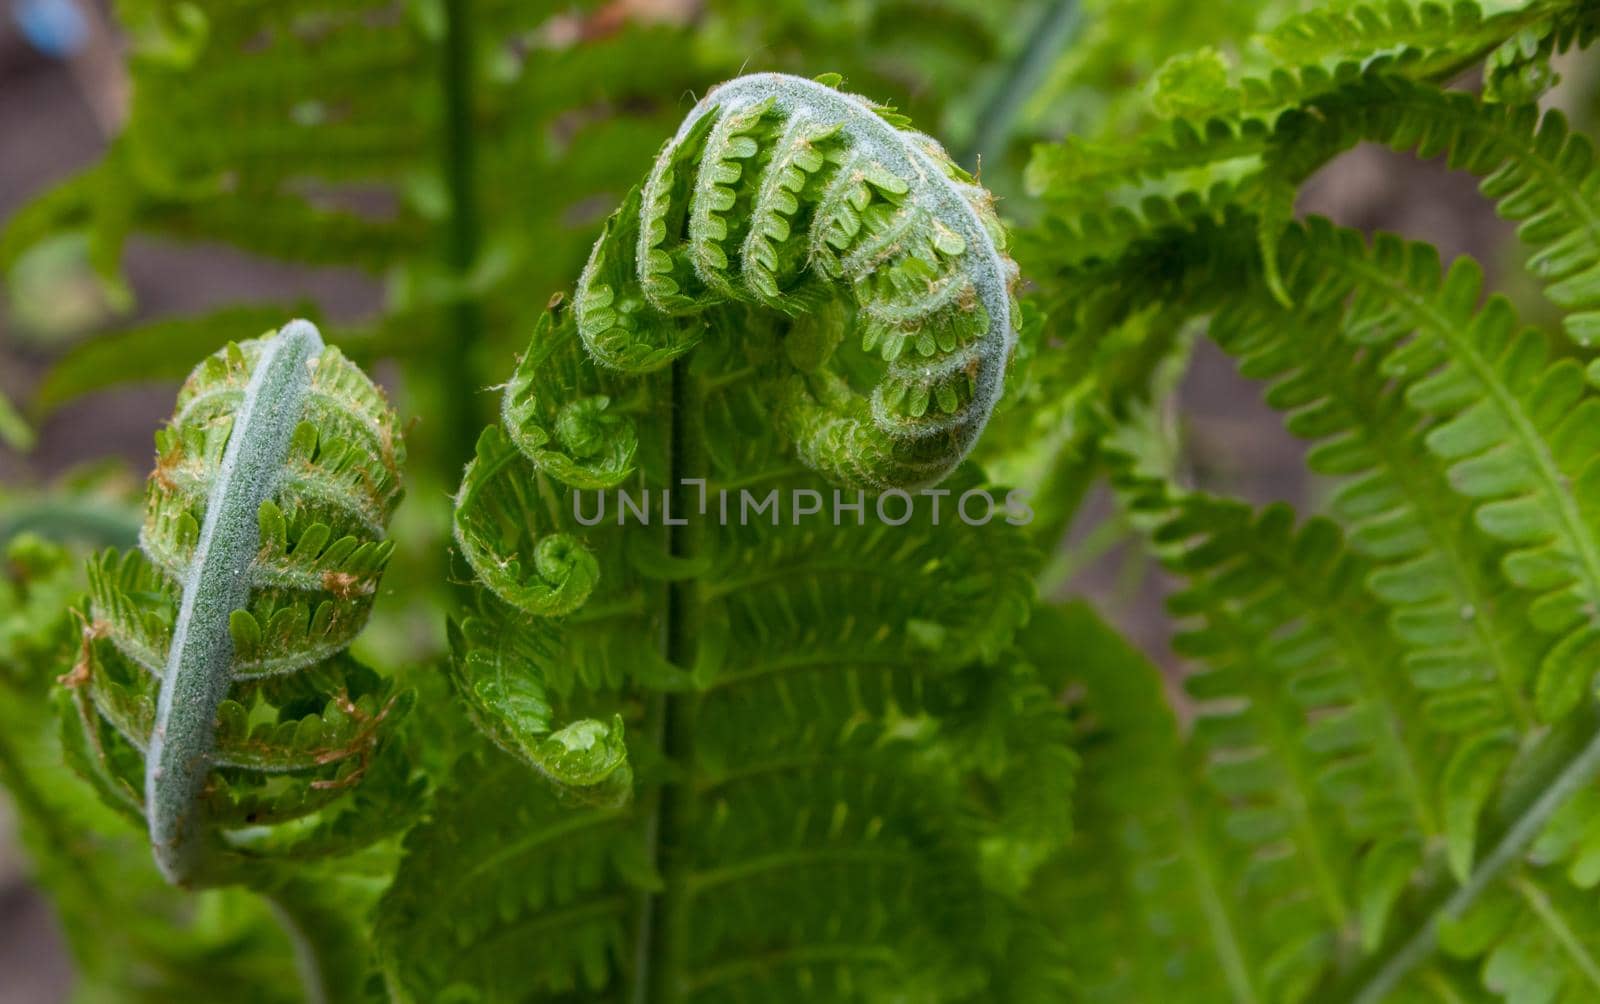 Fern Spiral of Matteuccia is a genus of ferns with one species: Matteuccia struthiopteris common names ostrich fern, fiddlehead fern, or shuttlecock fern by lapushka62